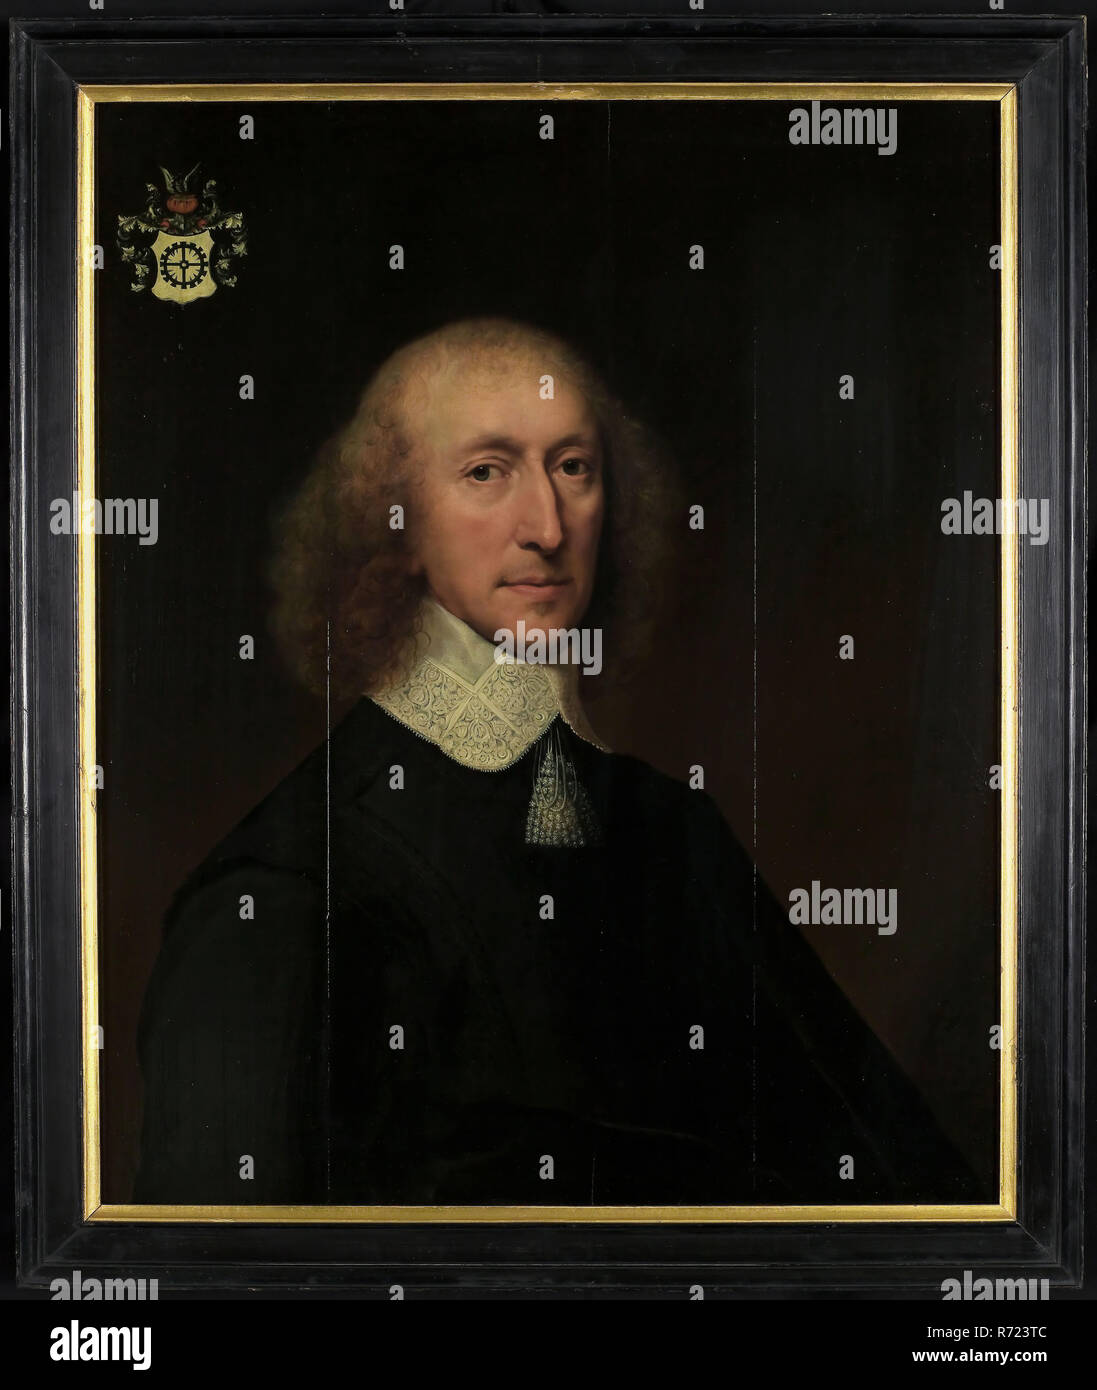 Cornelis Janssens, Jonson van Ceulen, Portrait of Daniël van Hogendorp, portrait painting visual material wood oil, Standing rectangular portrait of man representing Daniël van Hogendorp (1604? -1673) bailiff and dike warden of Schieland member of the knight of Sint Michiel and lord of Moercapelle and Wilde Veenen Principal initiator for the construction of the Schielandshuis and laid the first stone for this on October 31, 1662 Marriage in 1650 with Ida Maria Hooft Calende skull with her shoulders to white collar with lace edge tassel black dress. In the top left corner family coat of arms wi Stock Photo